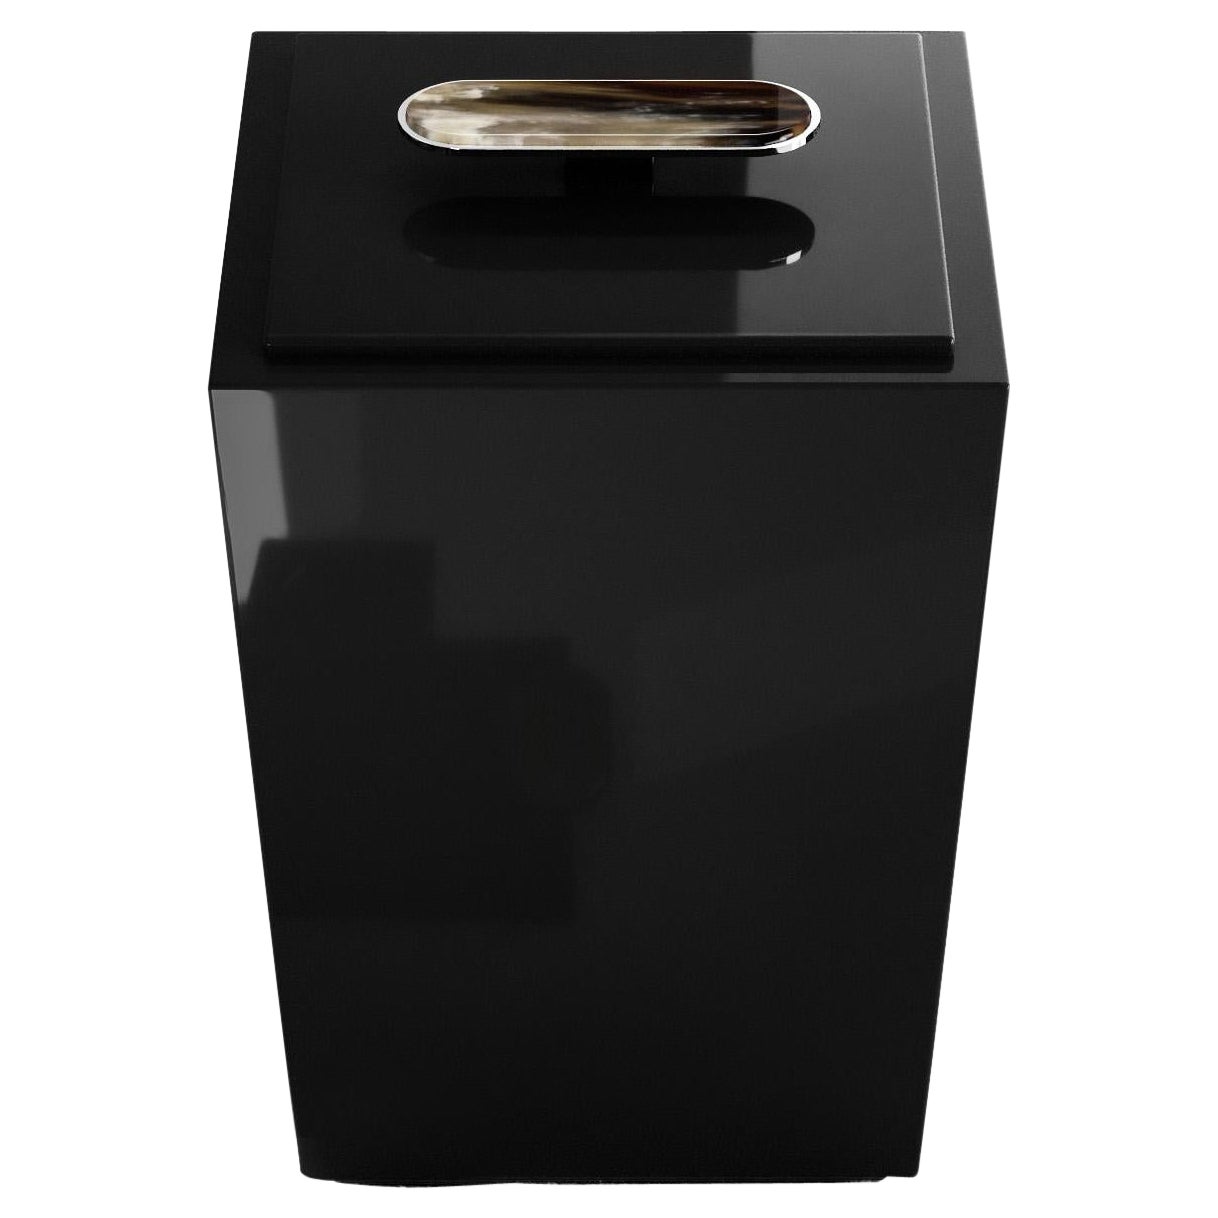 Bicco Waste Paper Basket in Black Lacquered Wood and Corno Italiano, Mod. 2426 For Sale